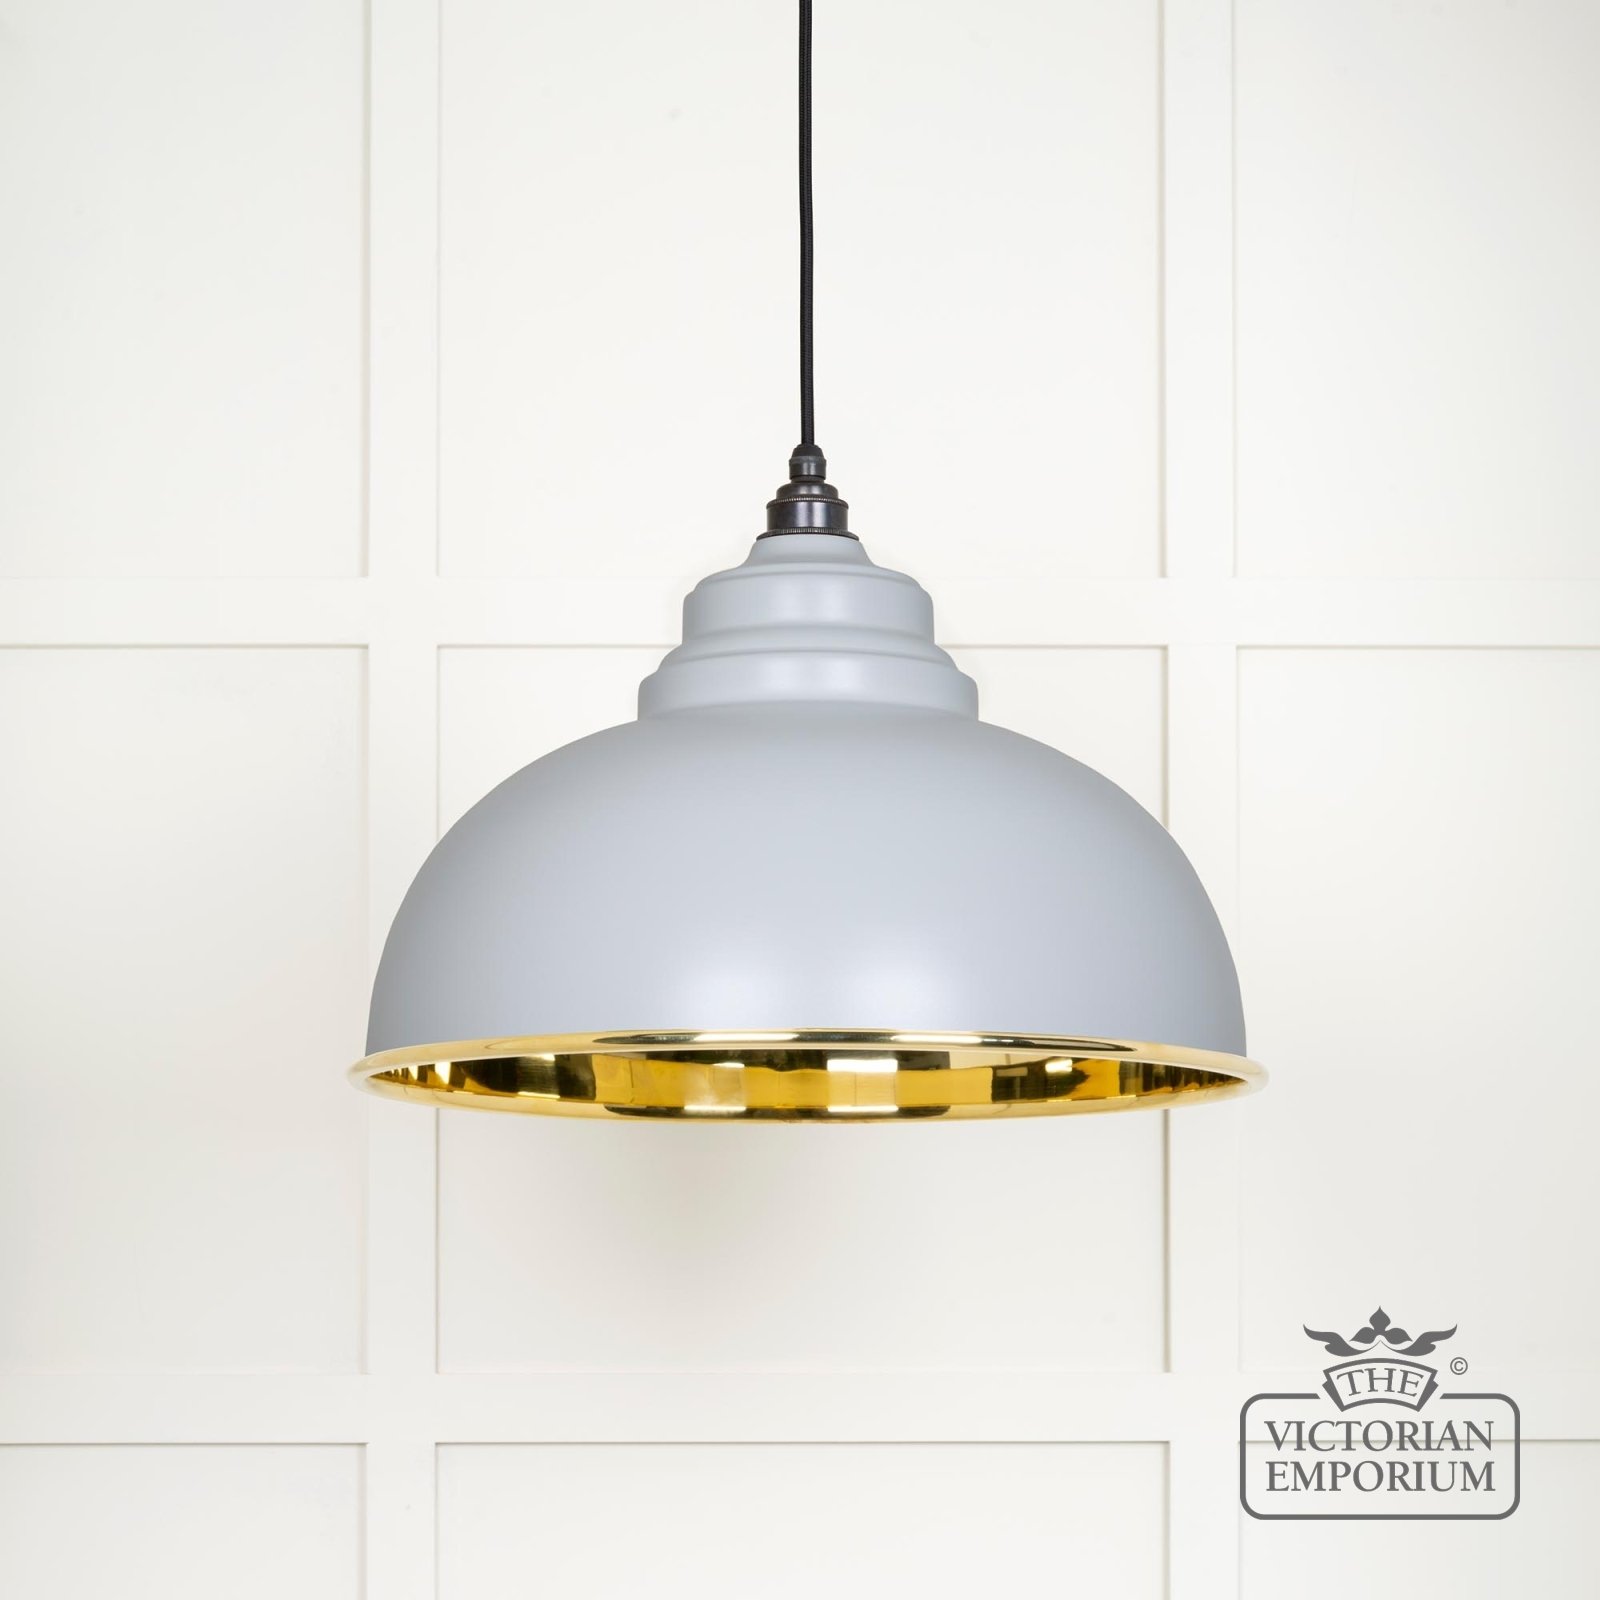 Harlow pendant light in smooth brass with painted Birch exterior